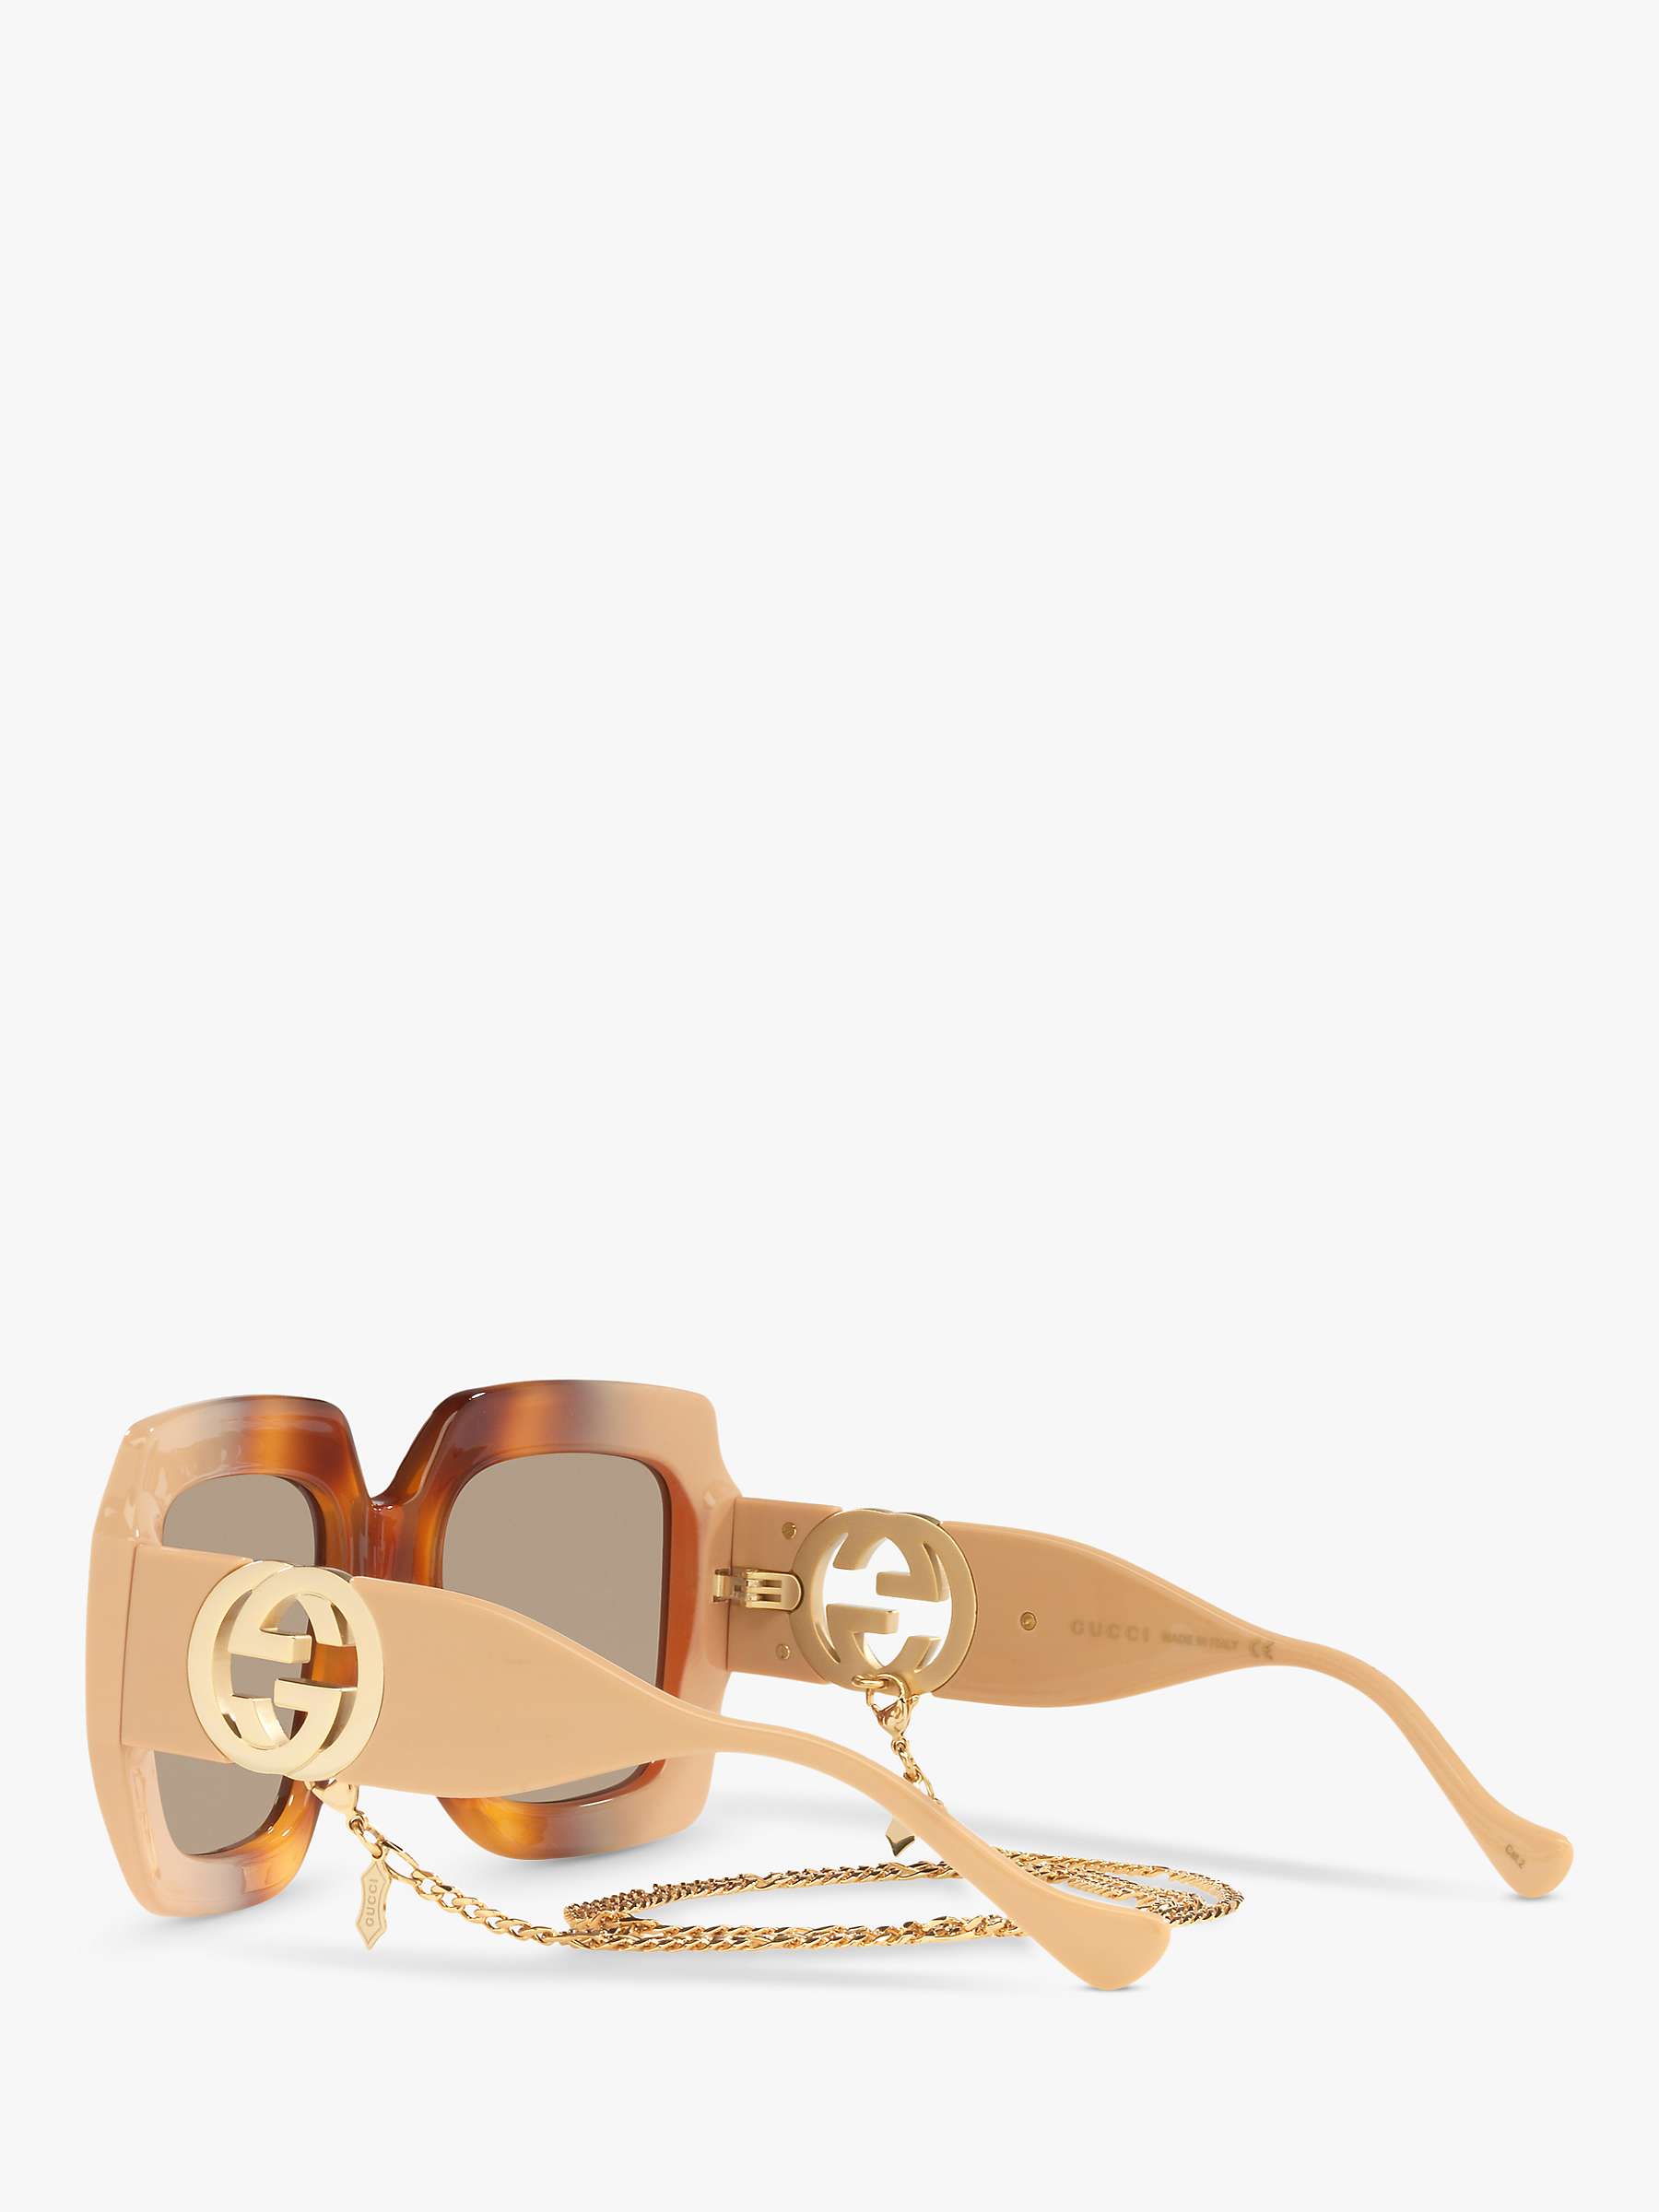 Buy Gucci GG1022S Women's Chunky Square Sunglasses, Beige/Grey Online at johnlewis.com